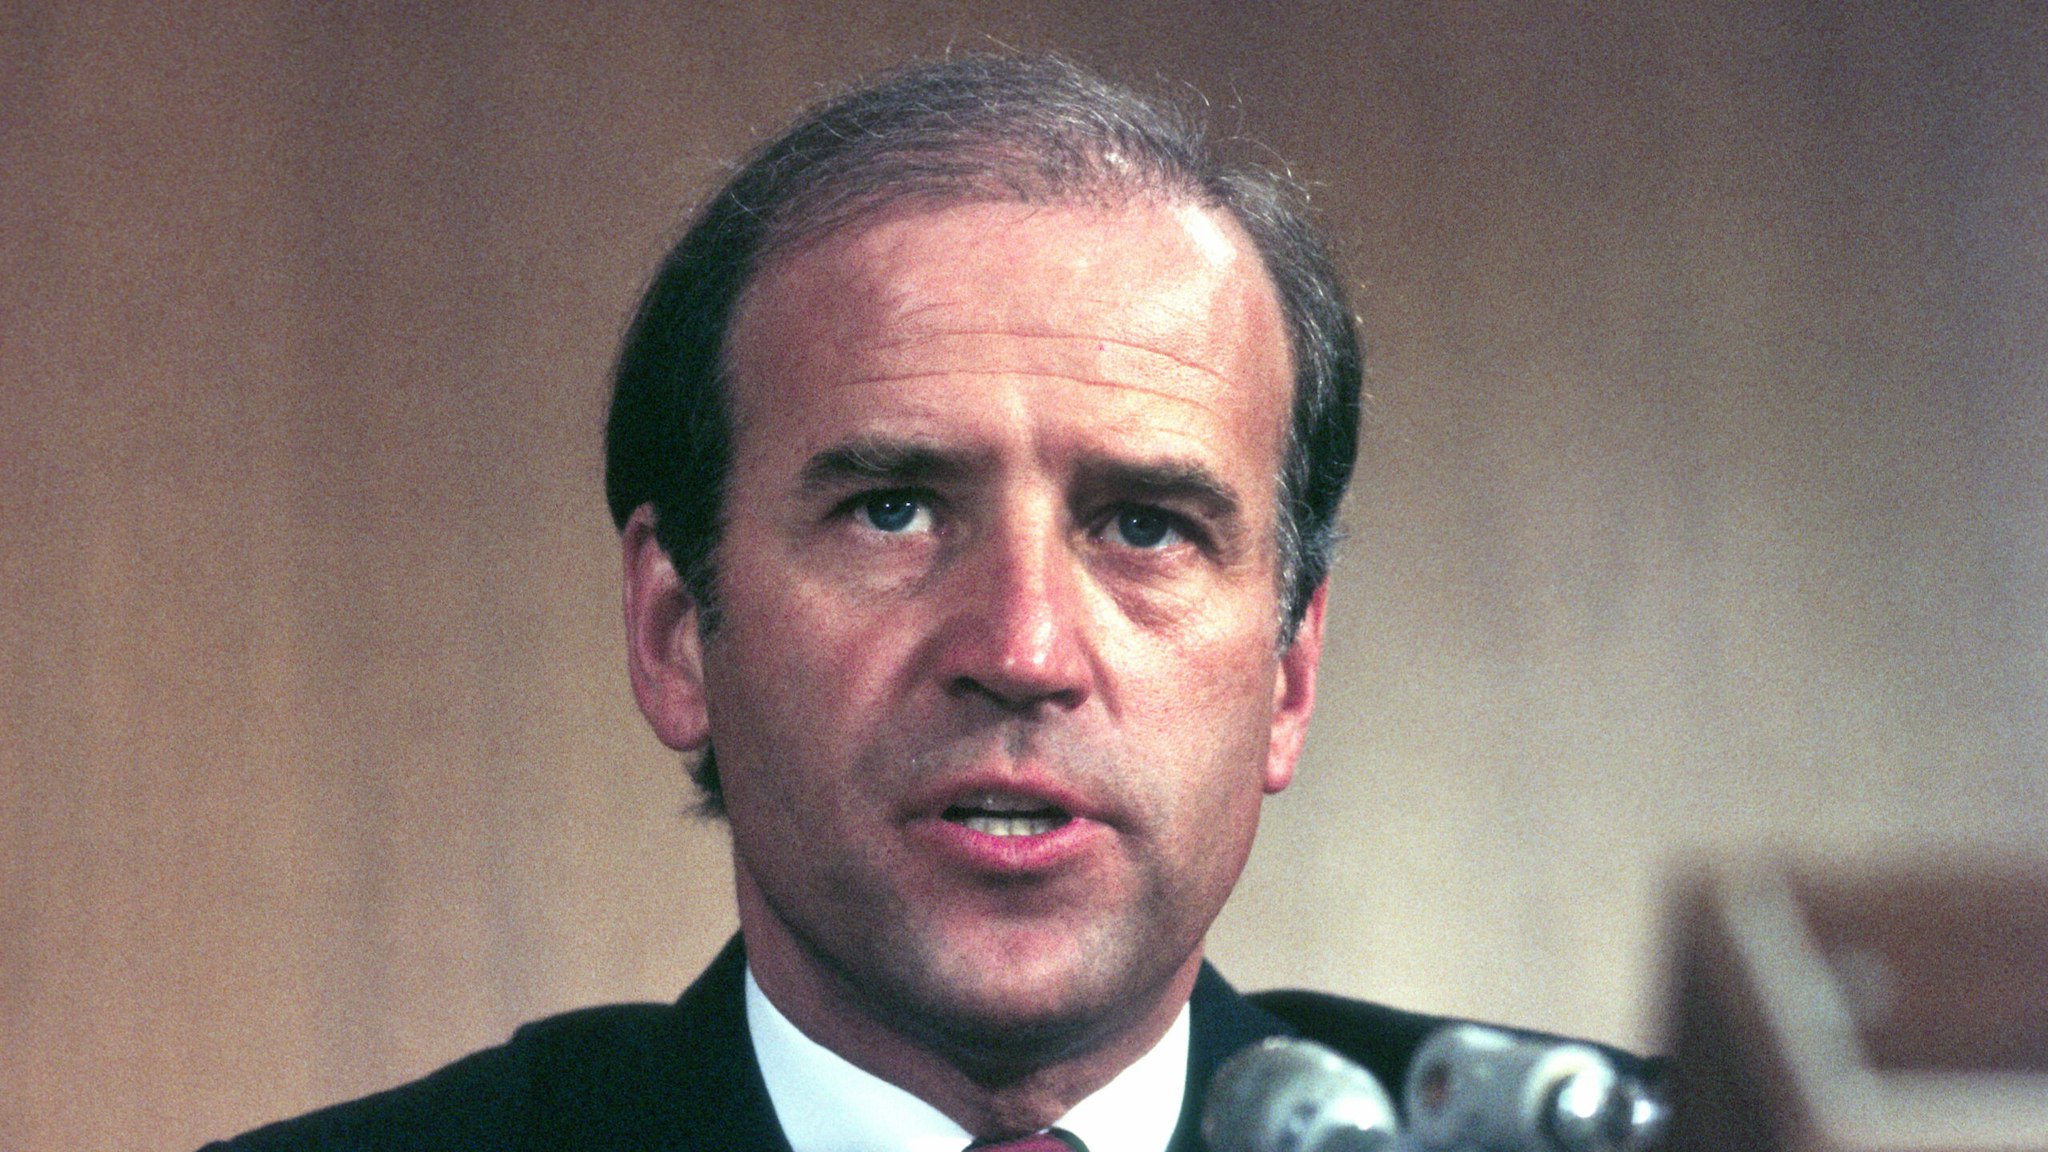 View of US Senator (and future US President) Joseph Biden during Justice William Rehnquist's confirmation hearing before the Senate Committee on the Judiciary, Washington DC, July 29, 1986.